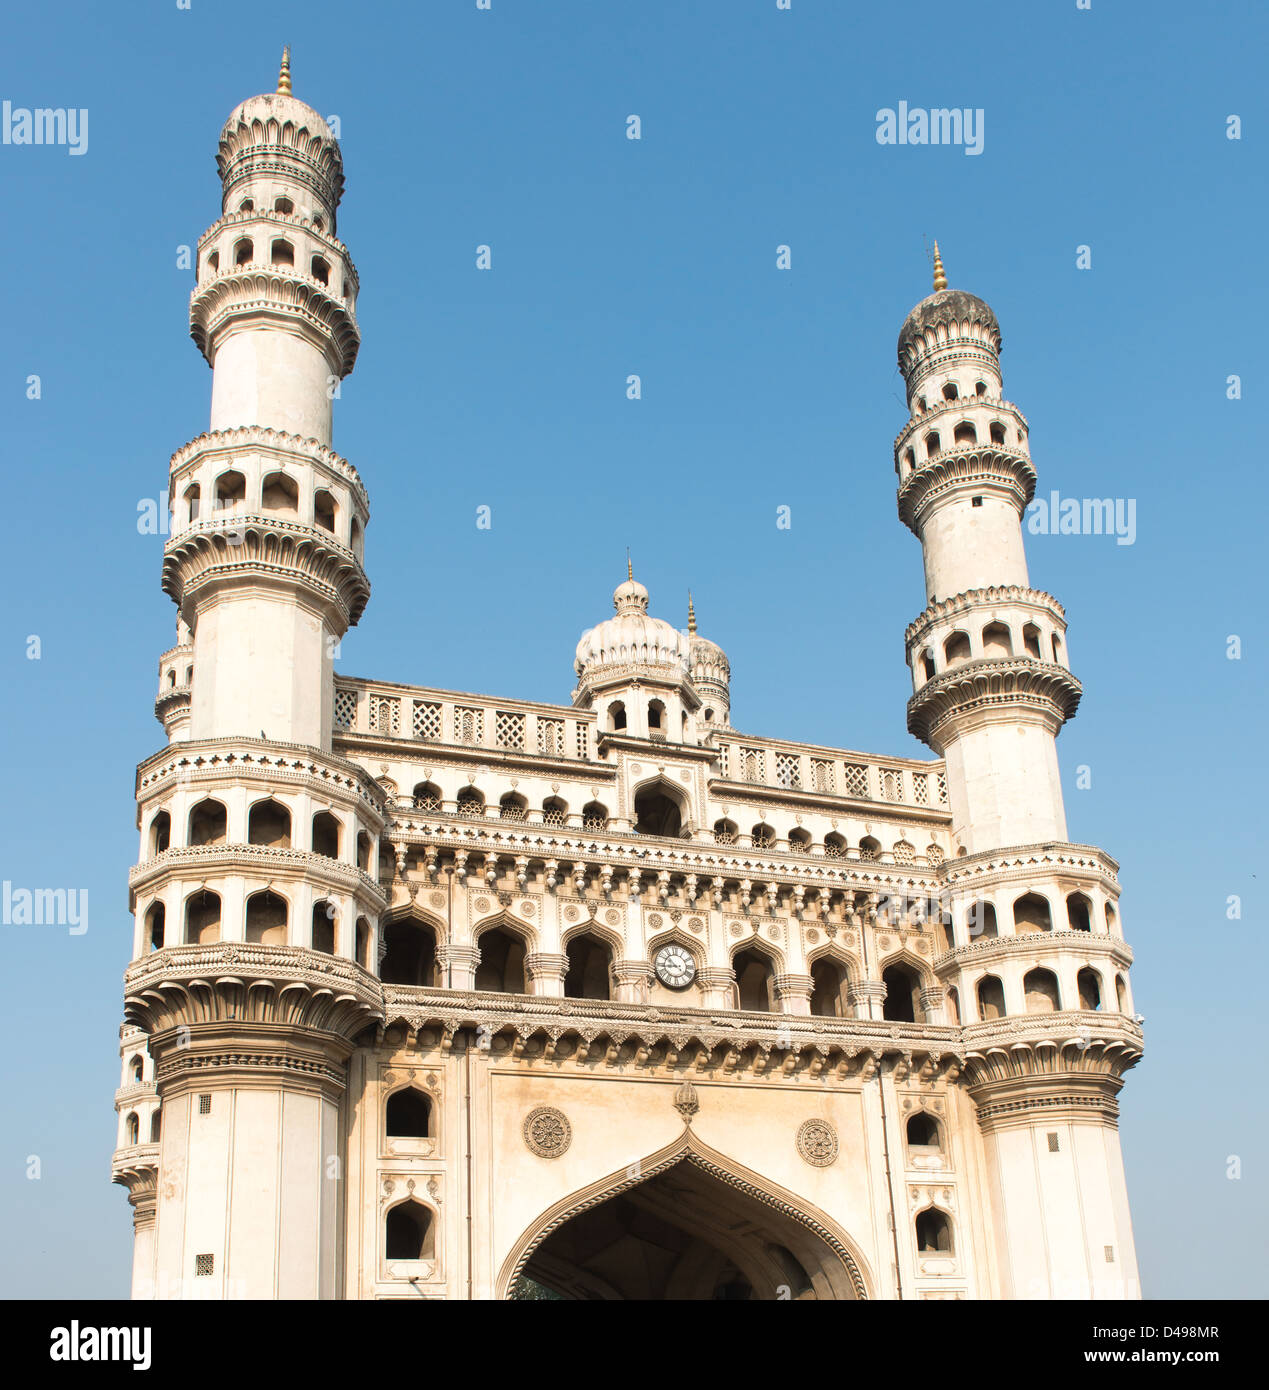 Hyderabad, India: Charminar or Four Towers is a prominent landmark. Stock Photo